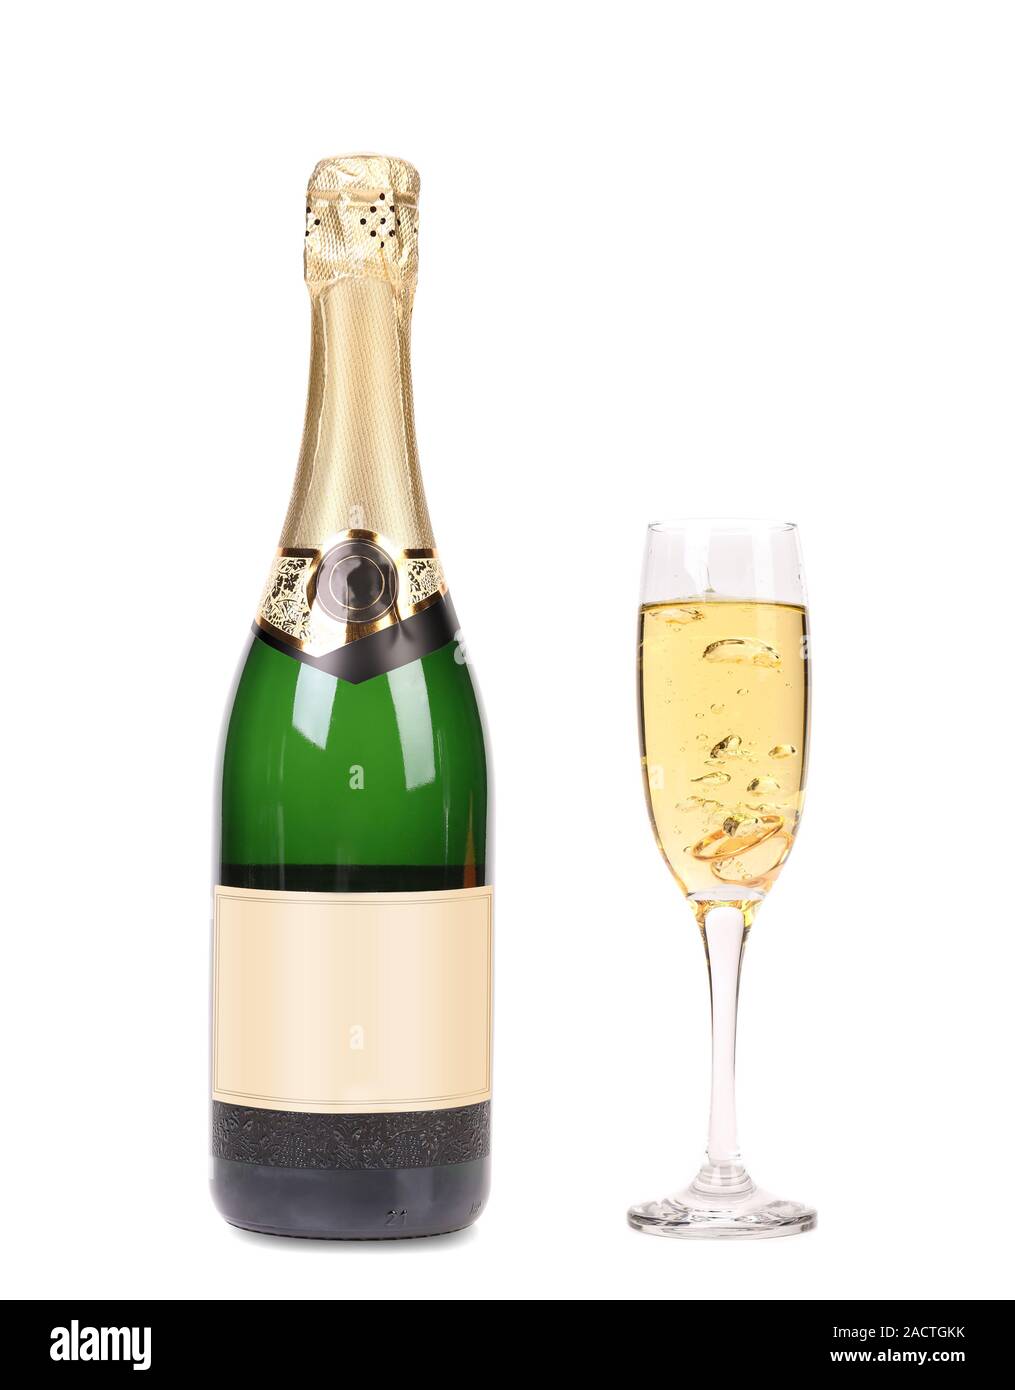 Bottle of champagne and full glass. Stock Photo